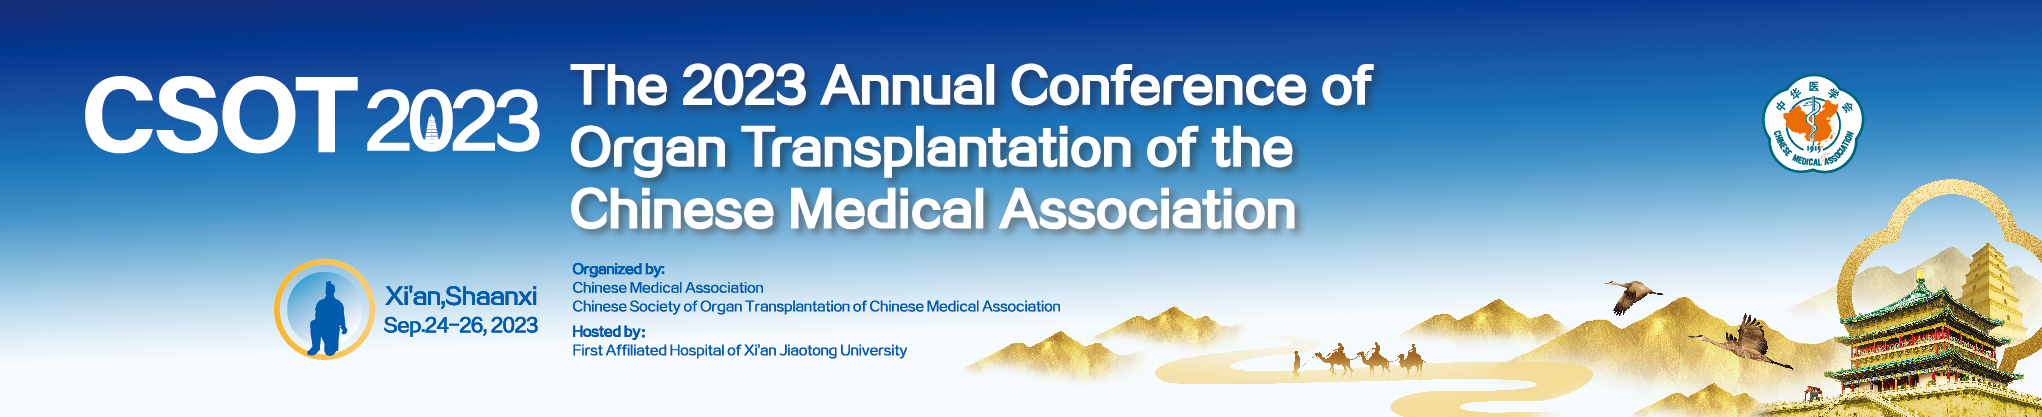 The 2023 Annual Conference of Organ Transplantation of the Chinese Medical Association